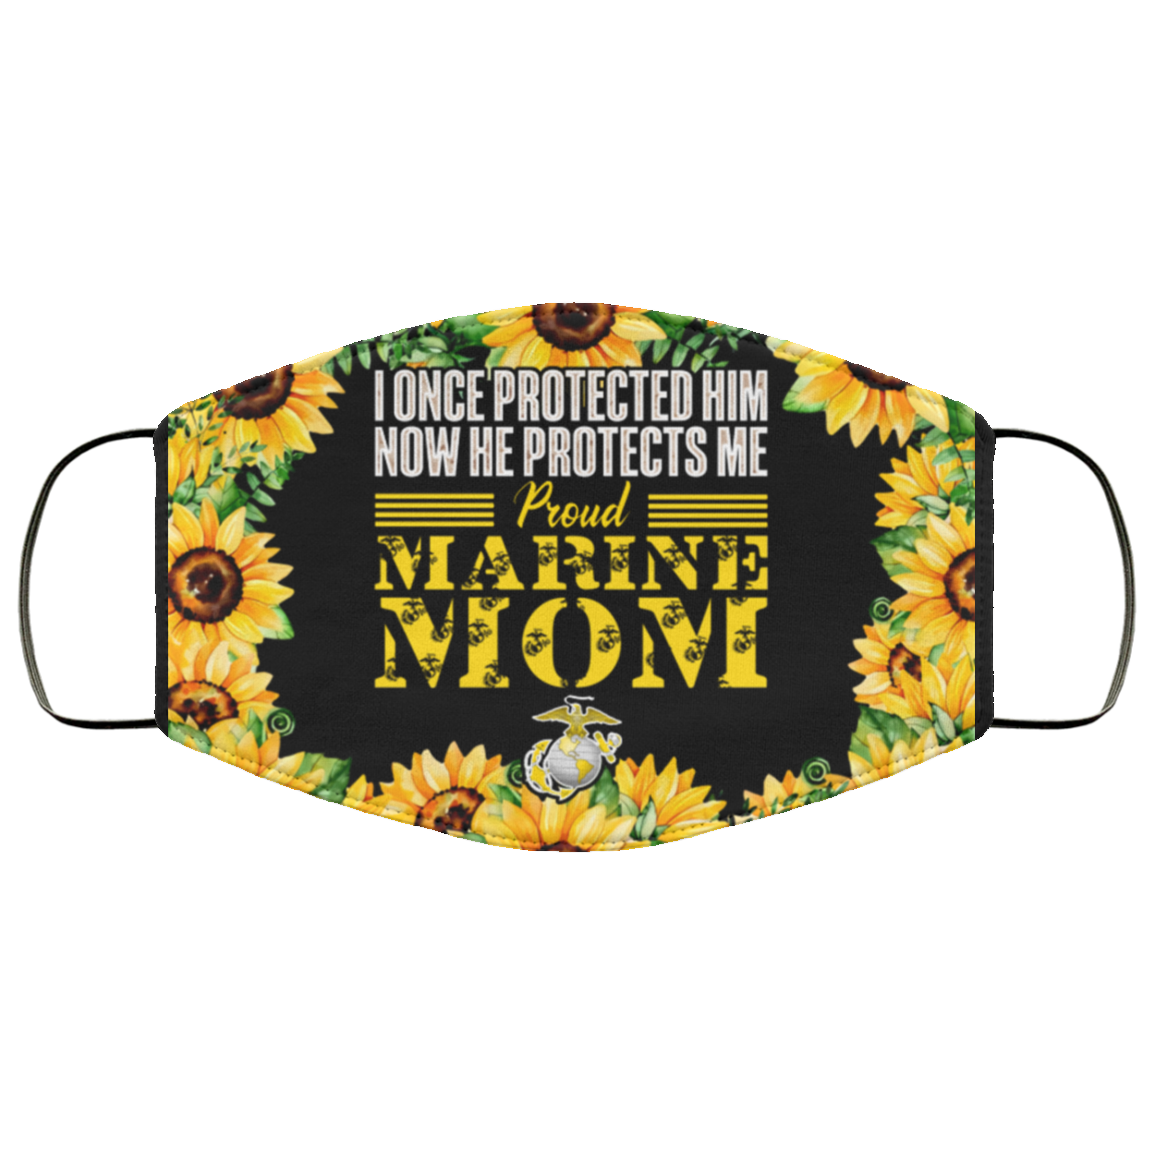 Now He Protects Me Face Mask - Marine Mom